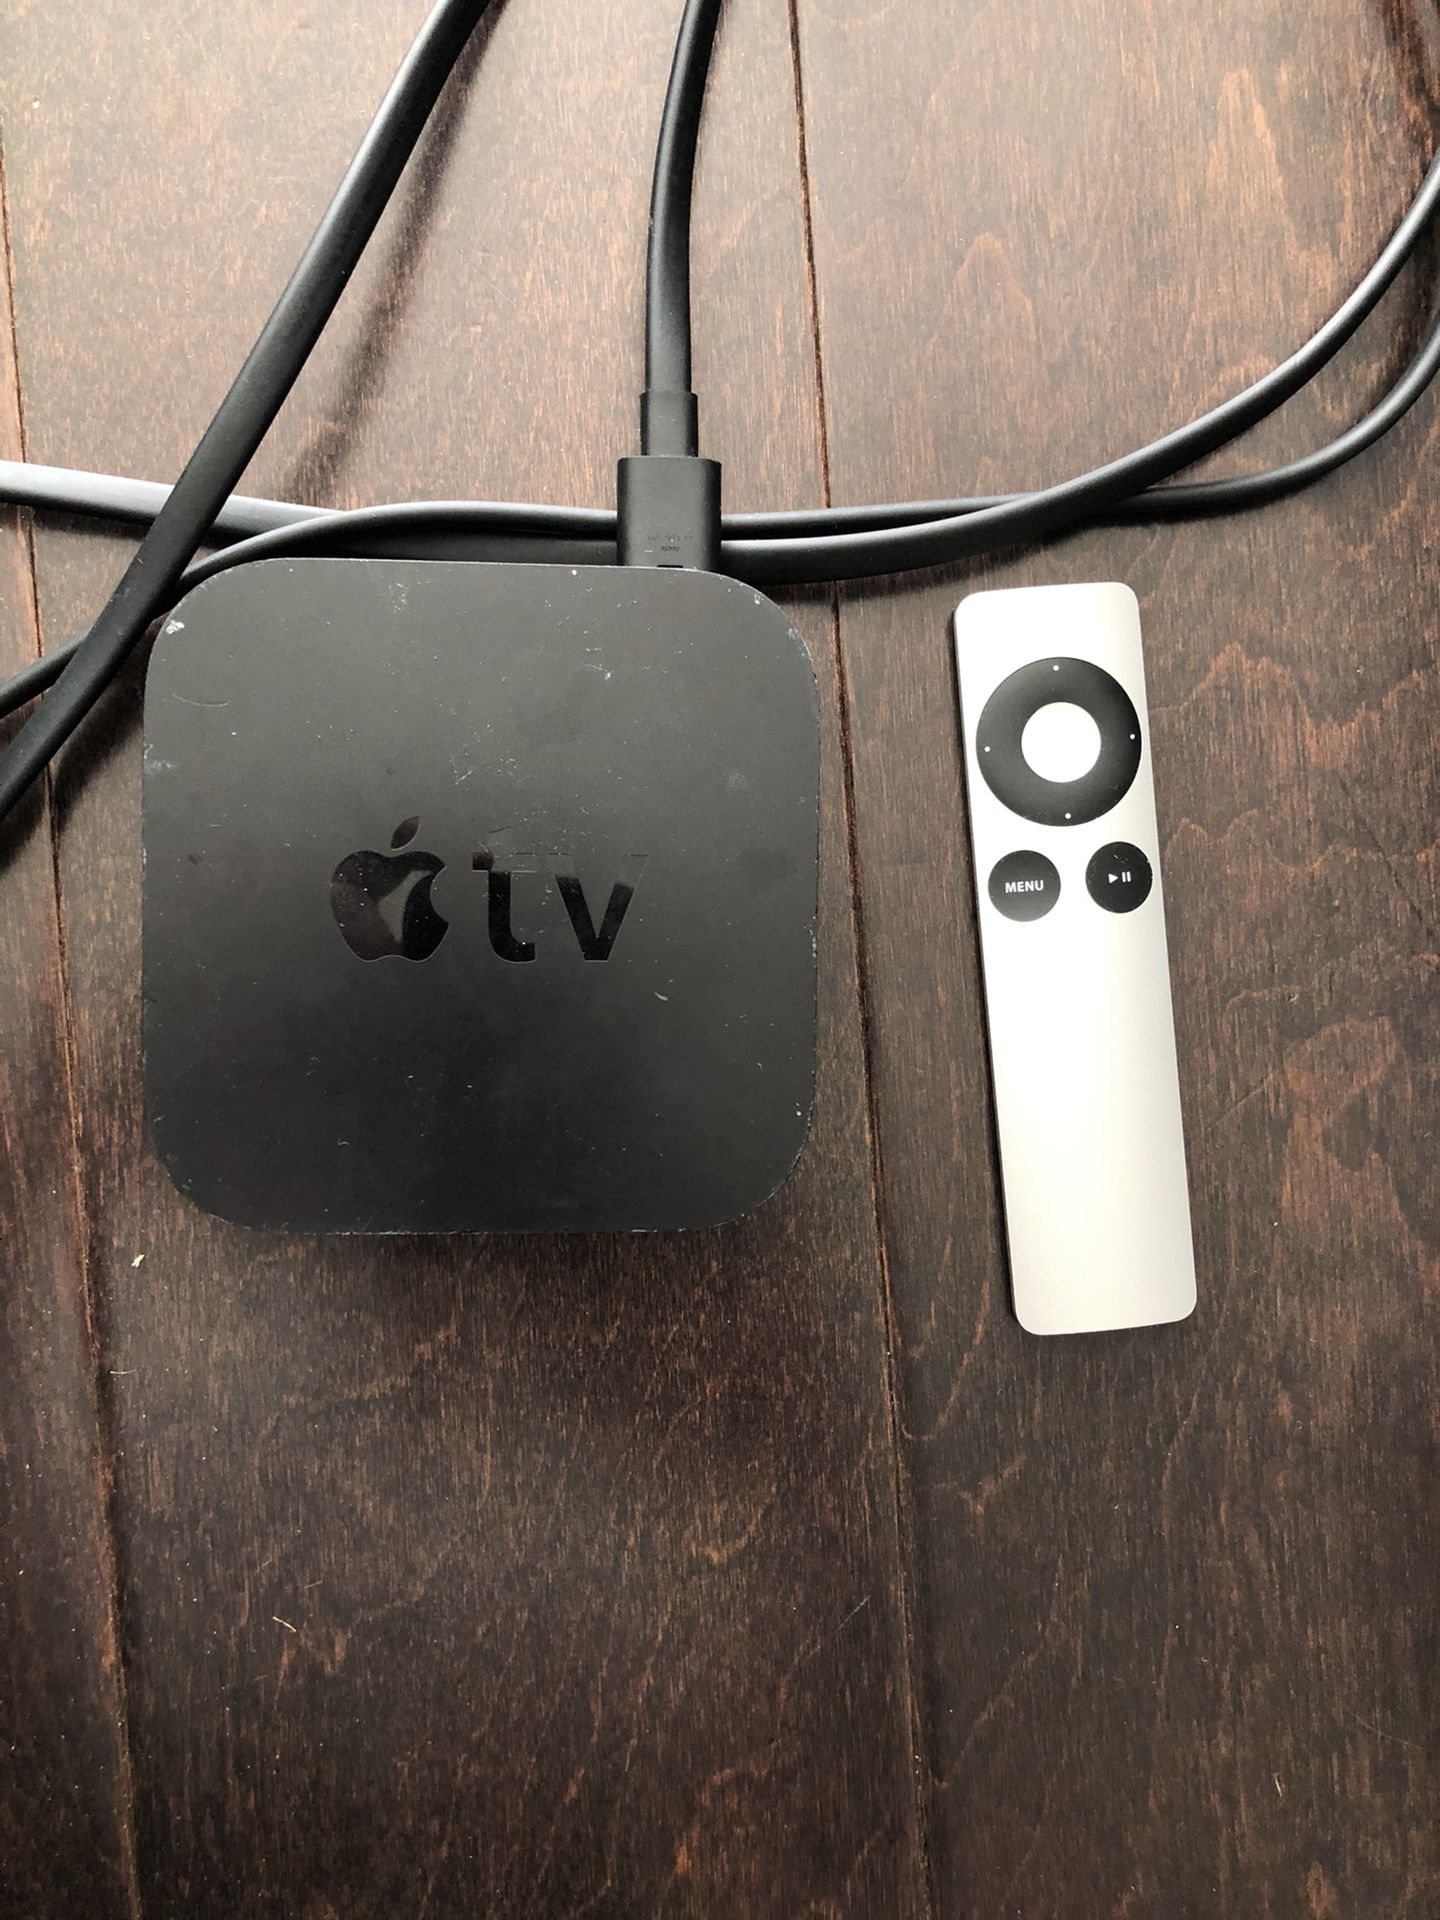 Apple TV 2nd Generation A1378 MC572LL/A Streaming Media Player